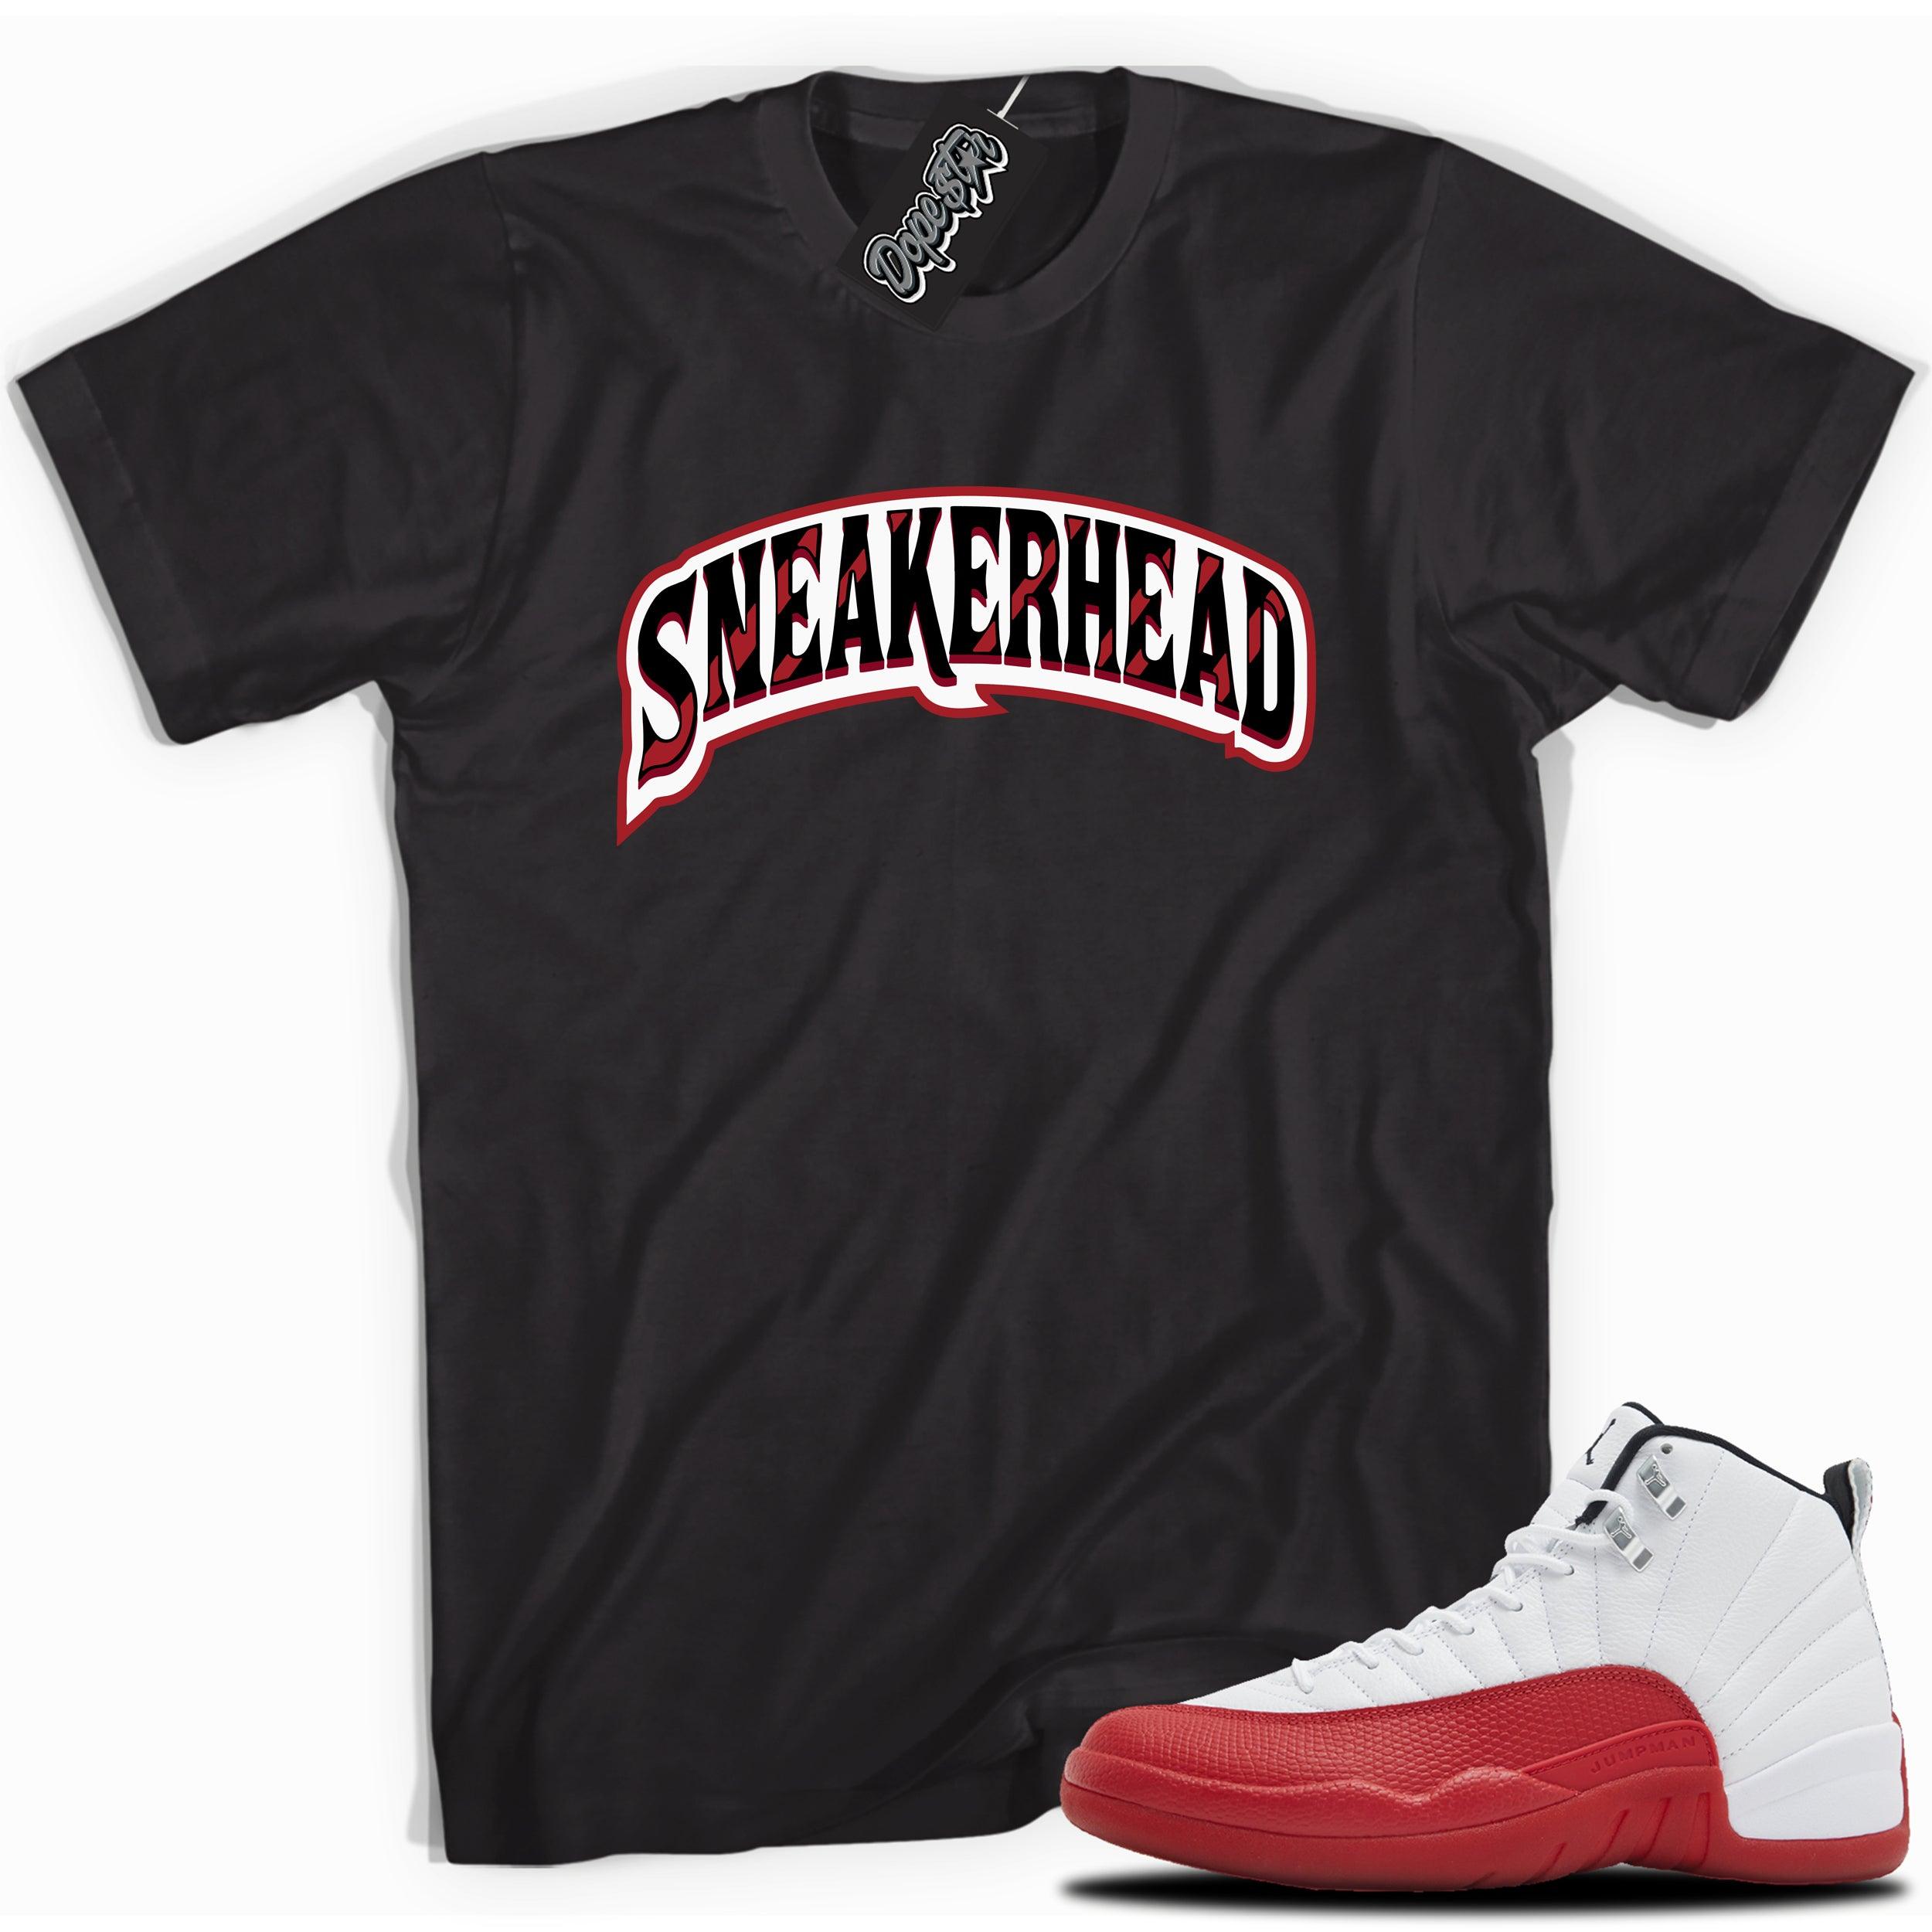 Cool Black graphic tee with “Sneaker-Head” print, that perfectly matches Air Jordan 12 Retro Cherry Red 2023 red and white sneakers